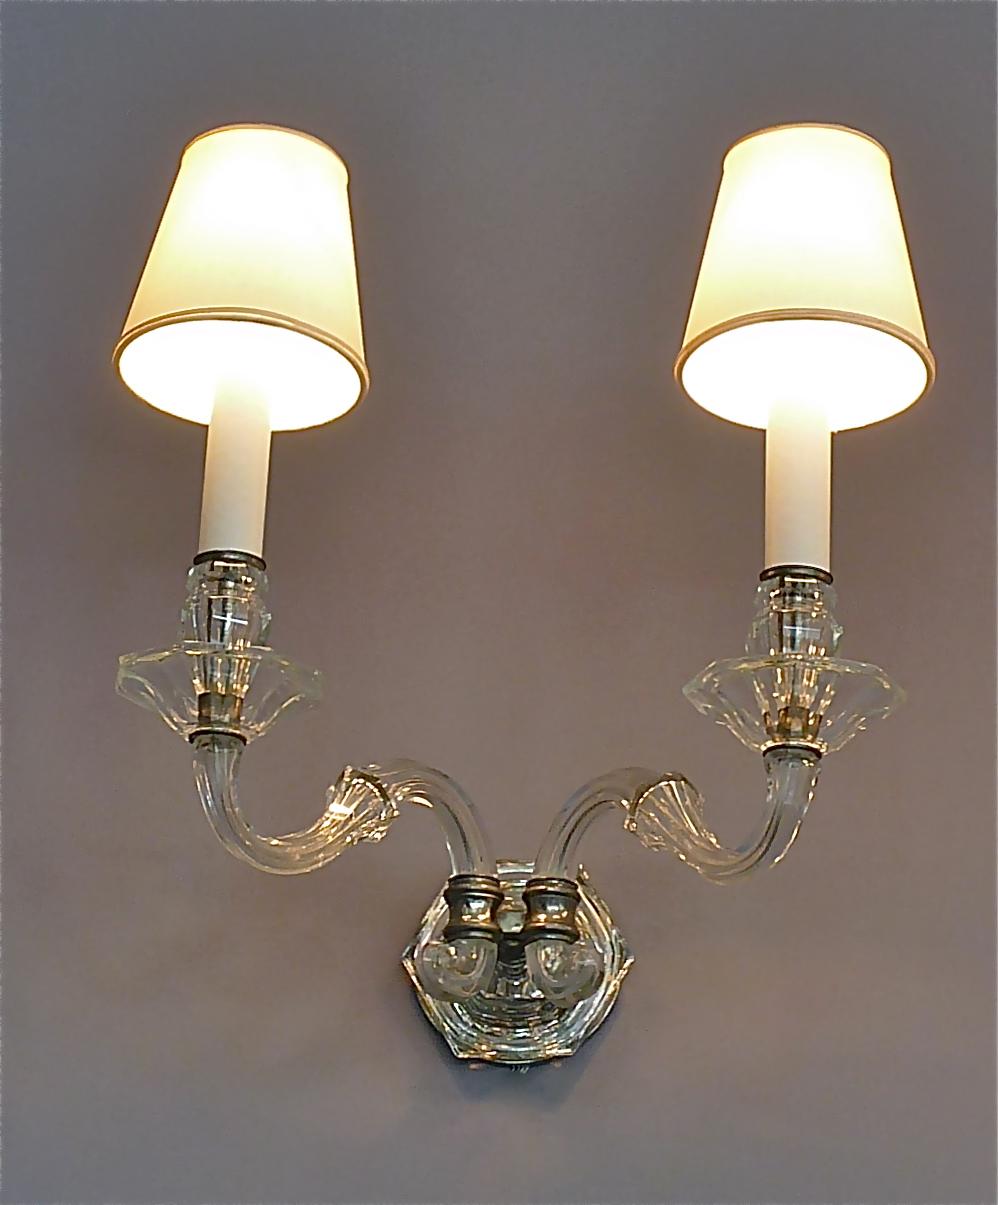 Pair of Art Deco Faceted Crystal Glass Wall Lights Sconces 1920, Baccarat Style 9